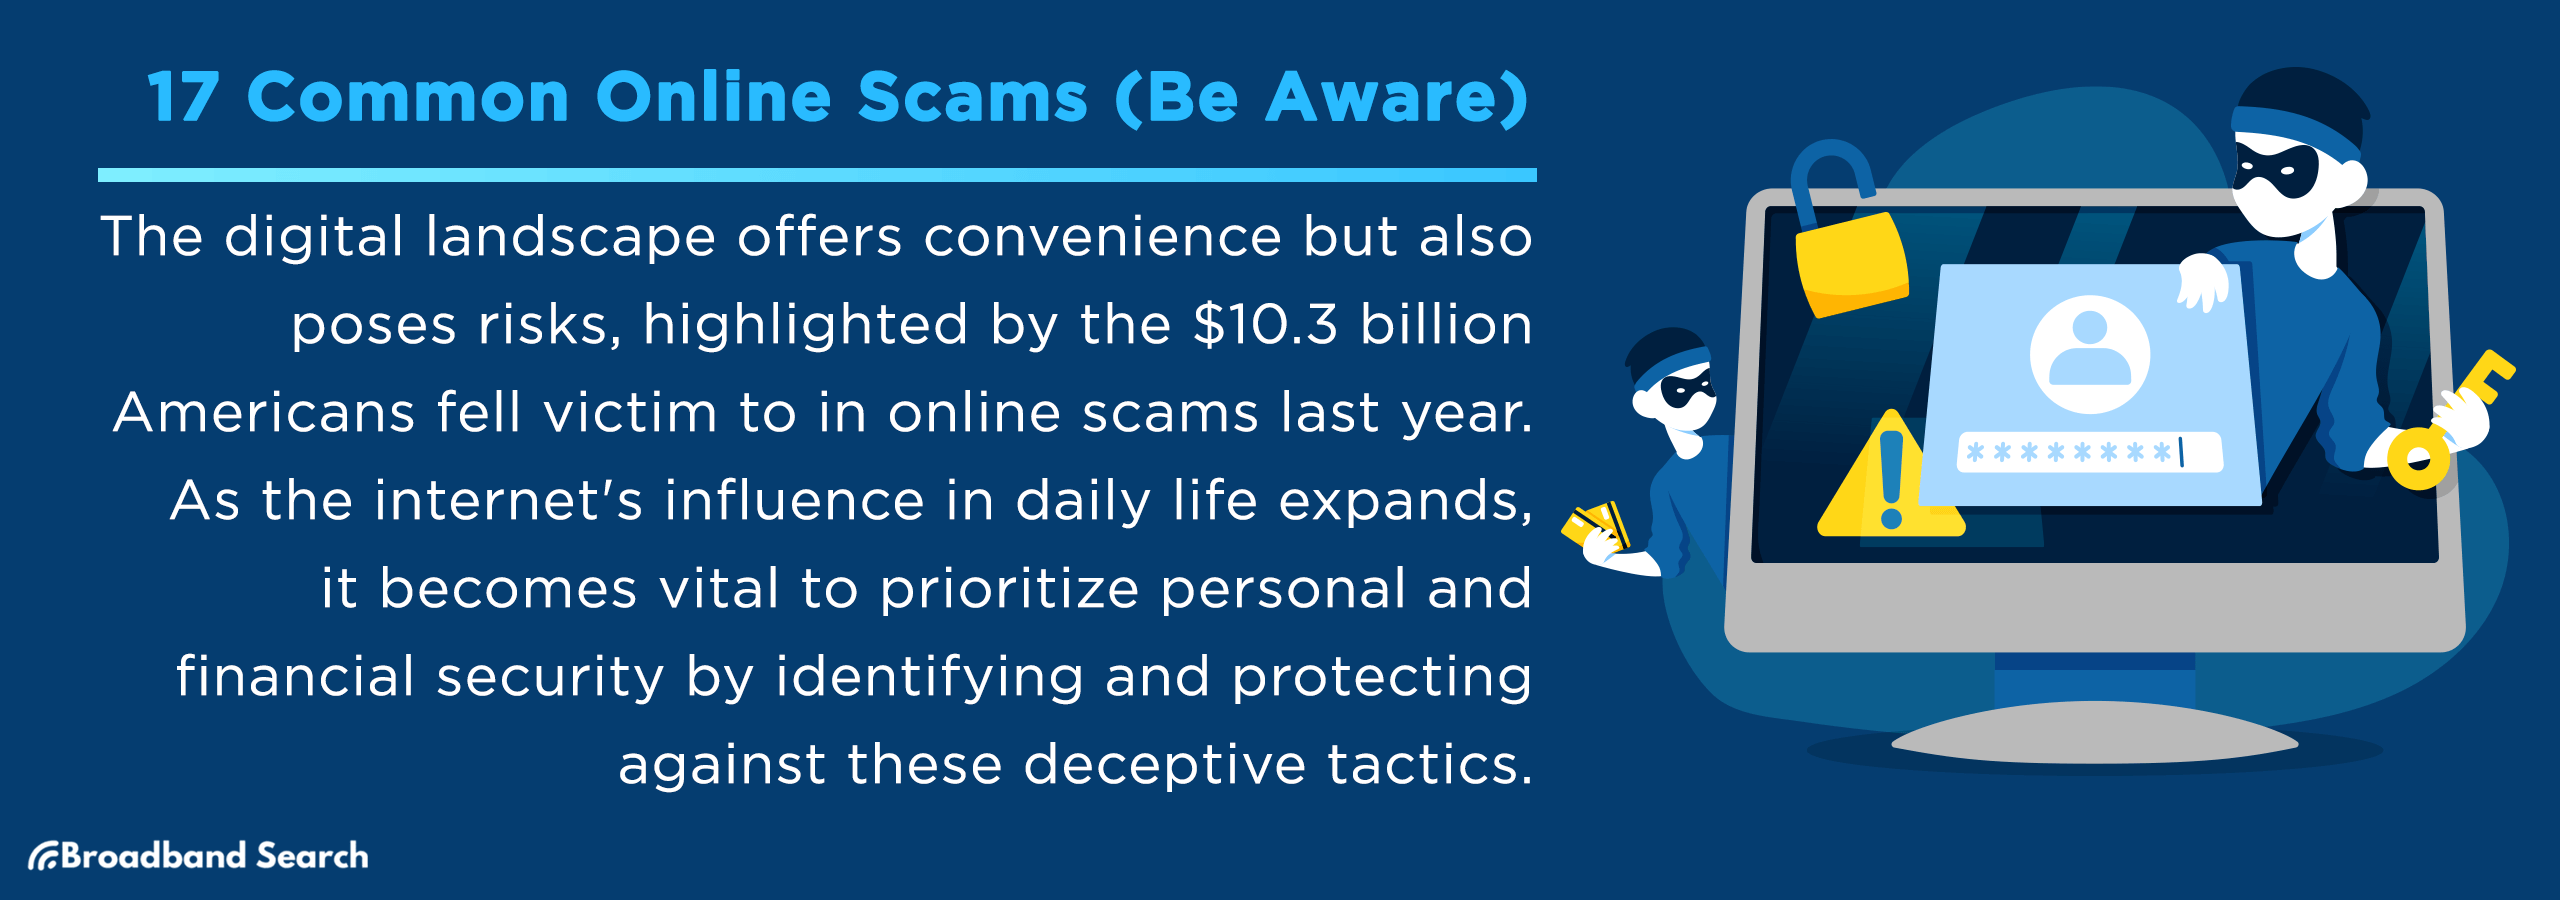 17 Common Online Scams (Be Aware)